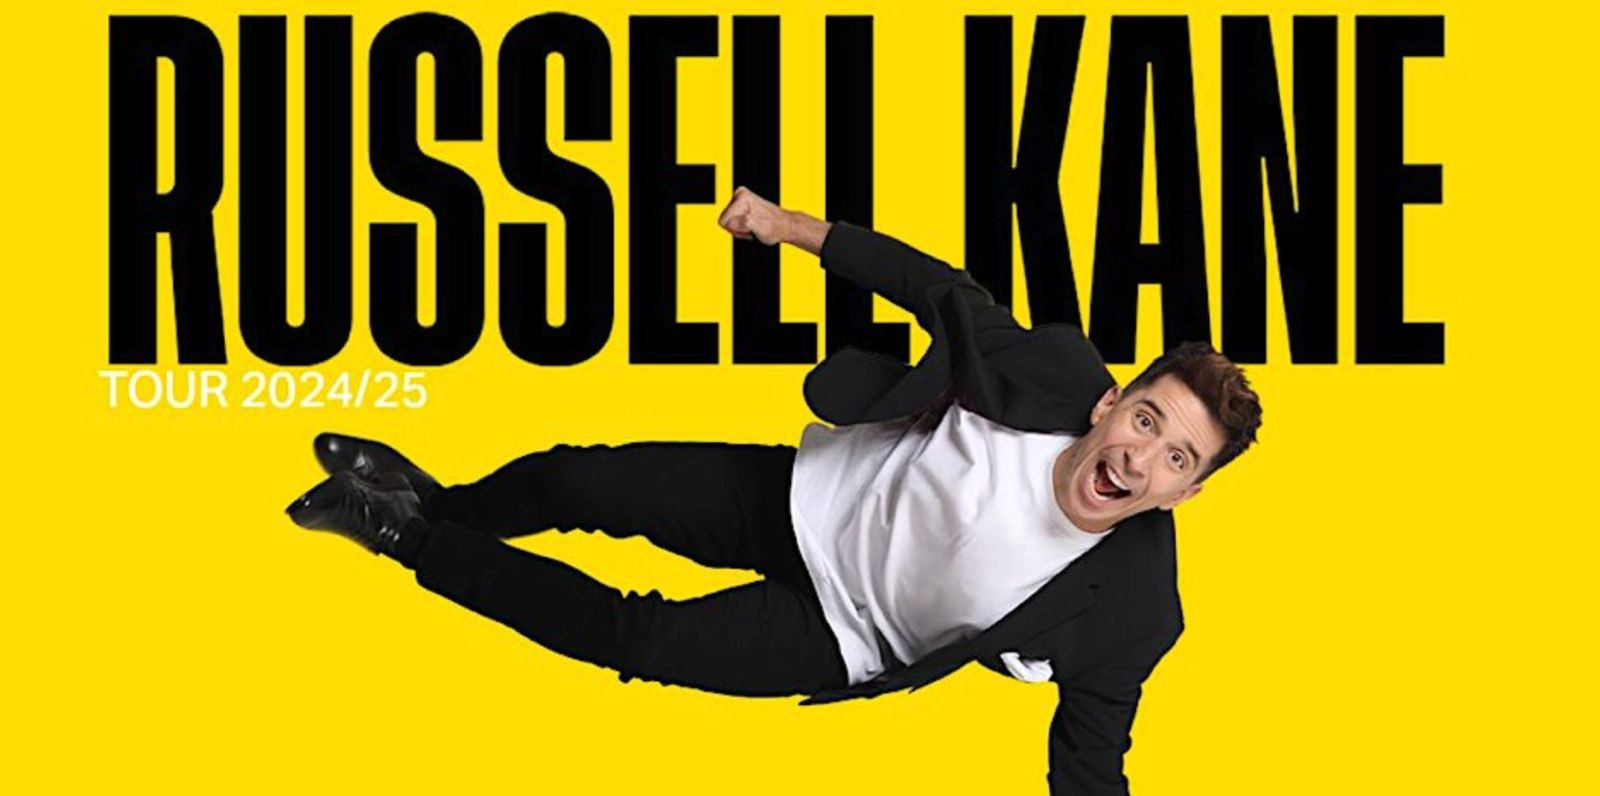 Russell Kane - Live in Singapore